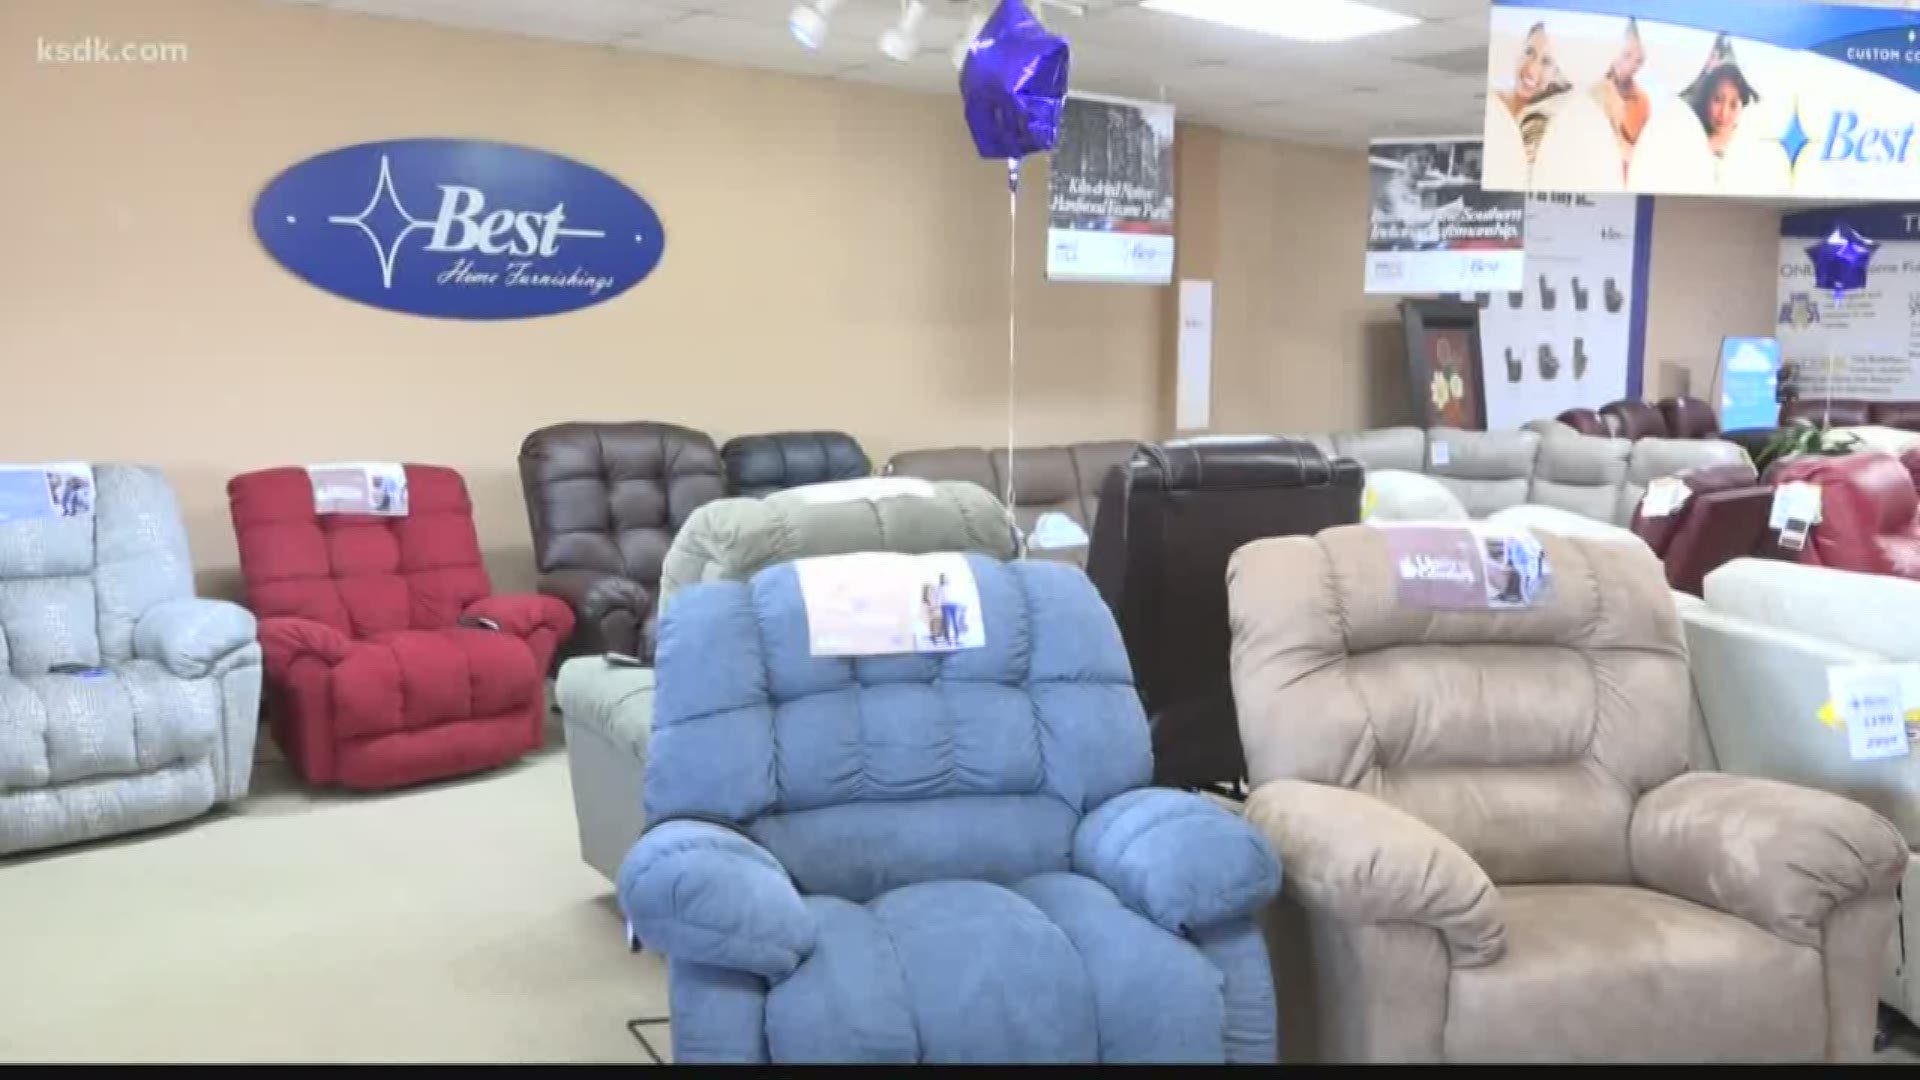 Find out what you can save money on this month at Best Home Furnishings.